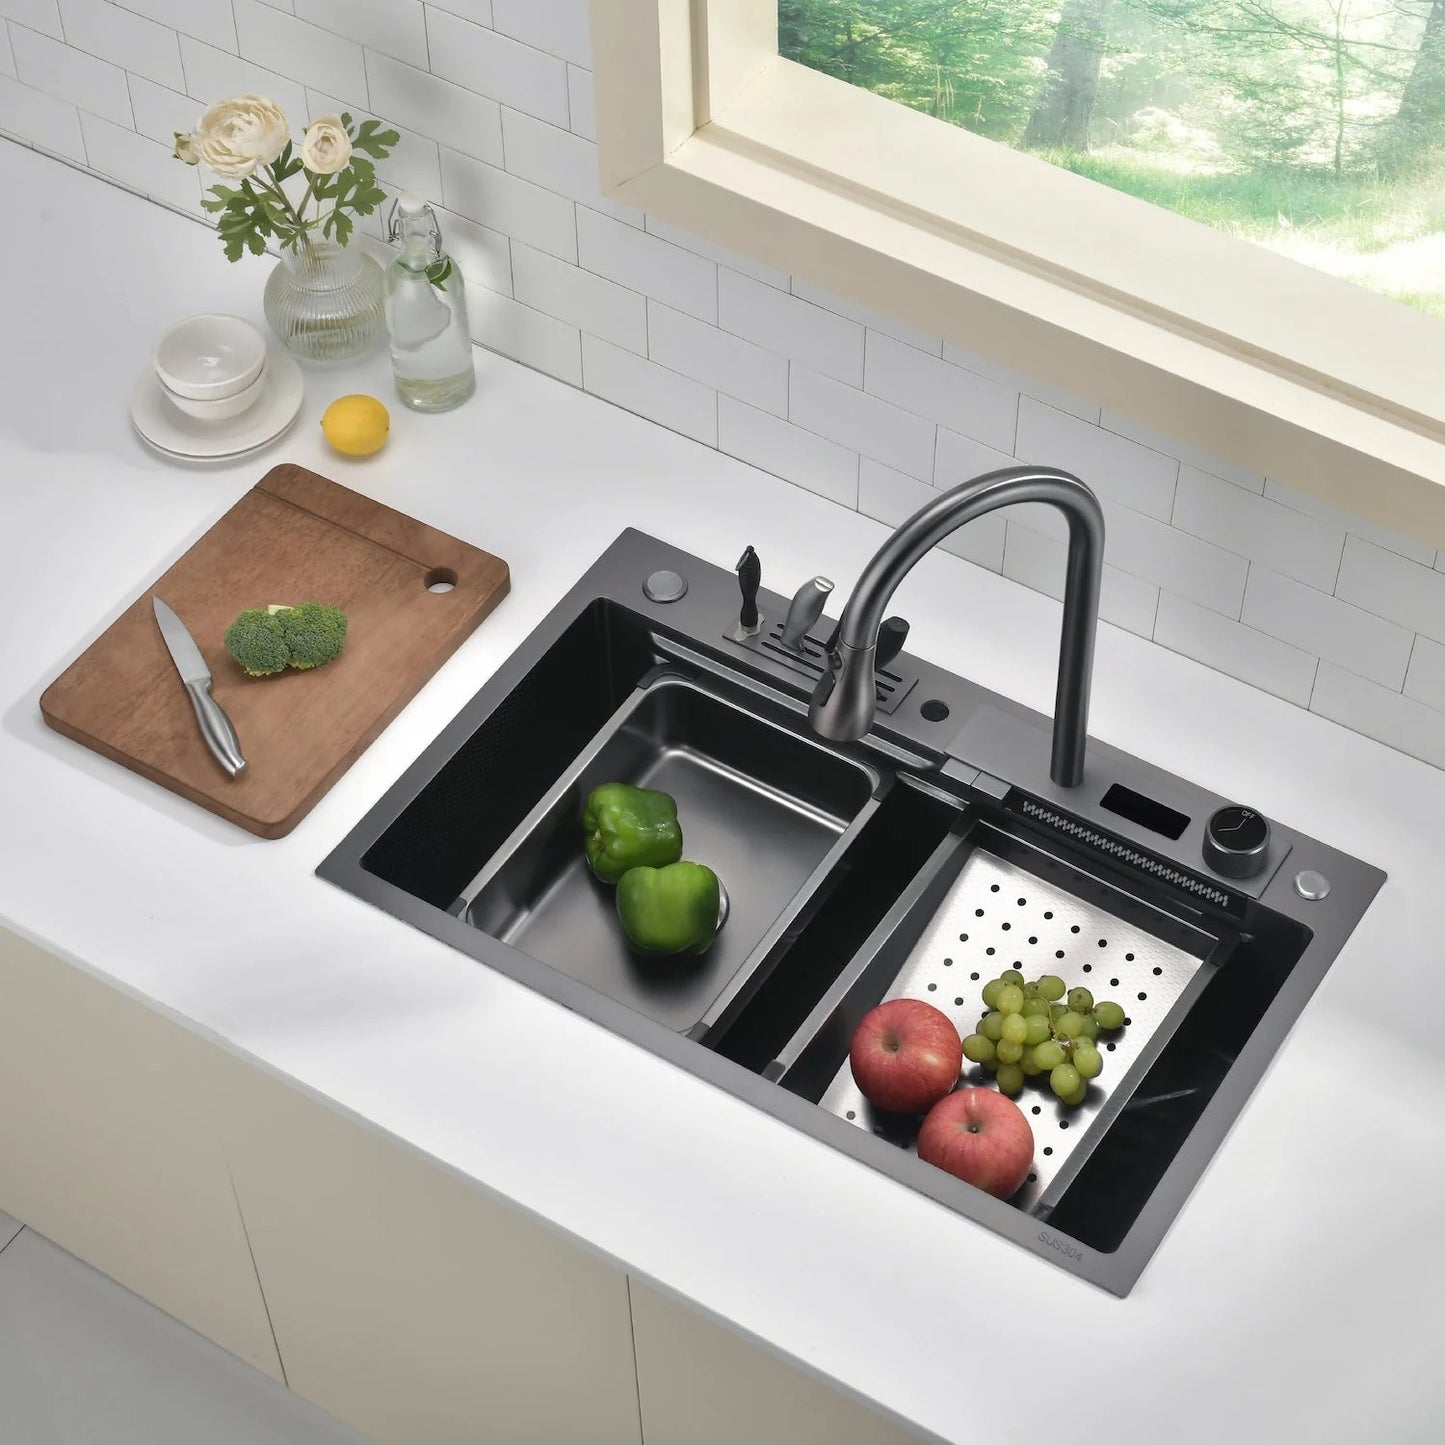 Aqua Waterfall Workstation Kitchen Sink Set with Digital Temperature Display and Knife Holder